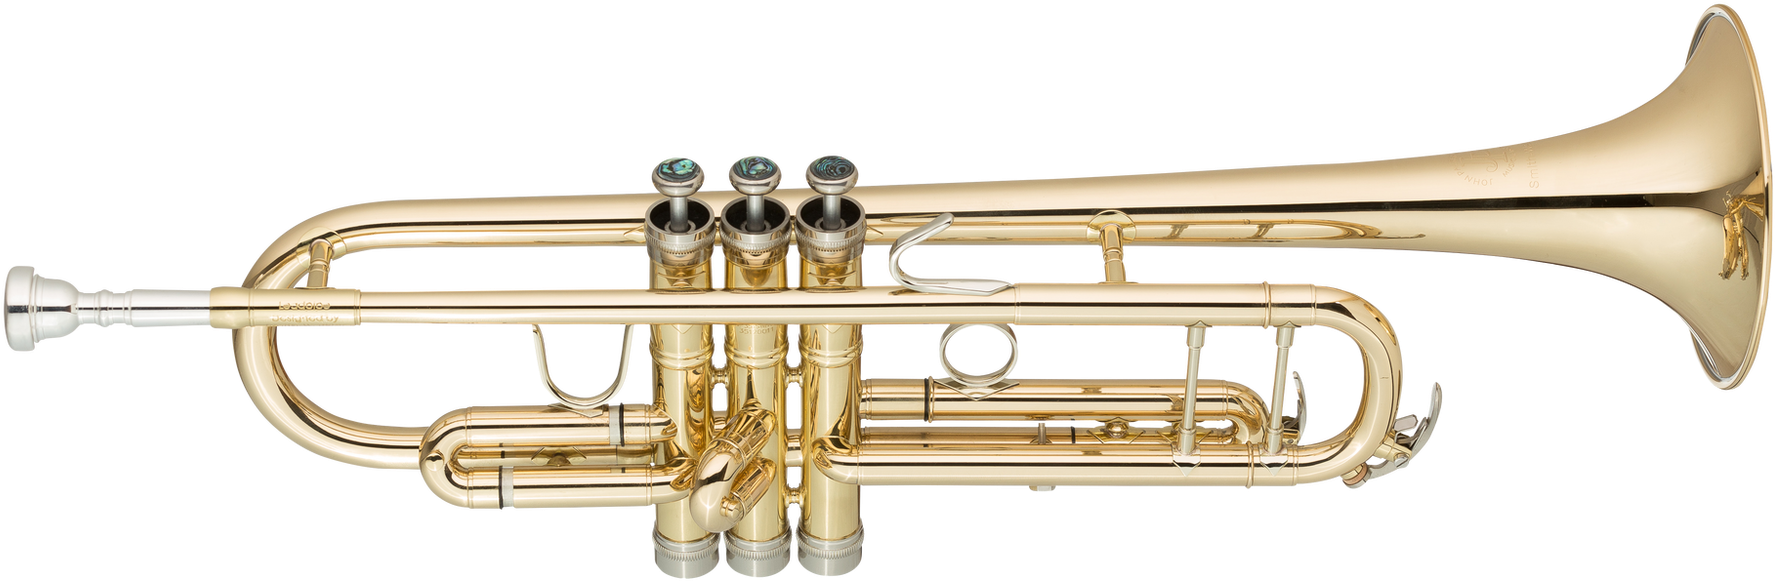 Brass Trumpet Isolatedon Background PNG